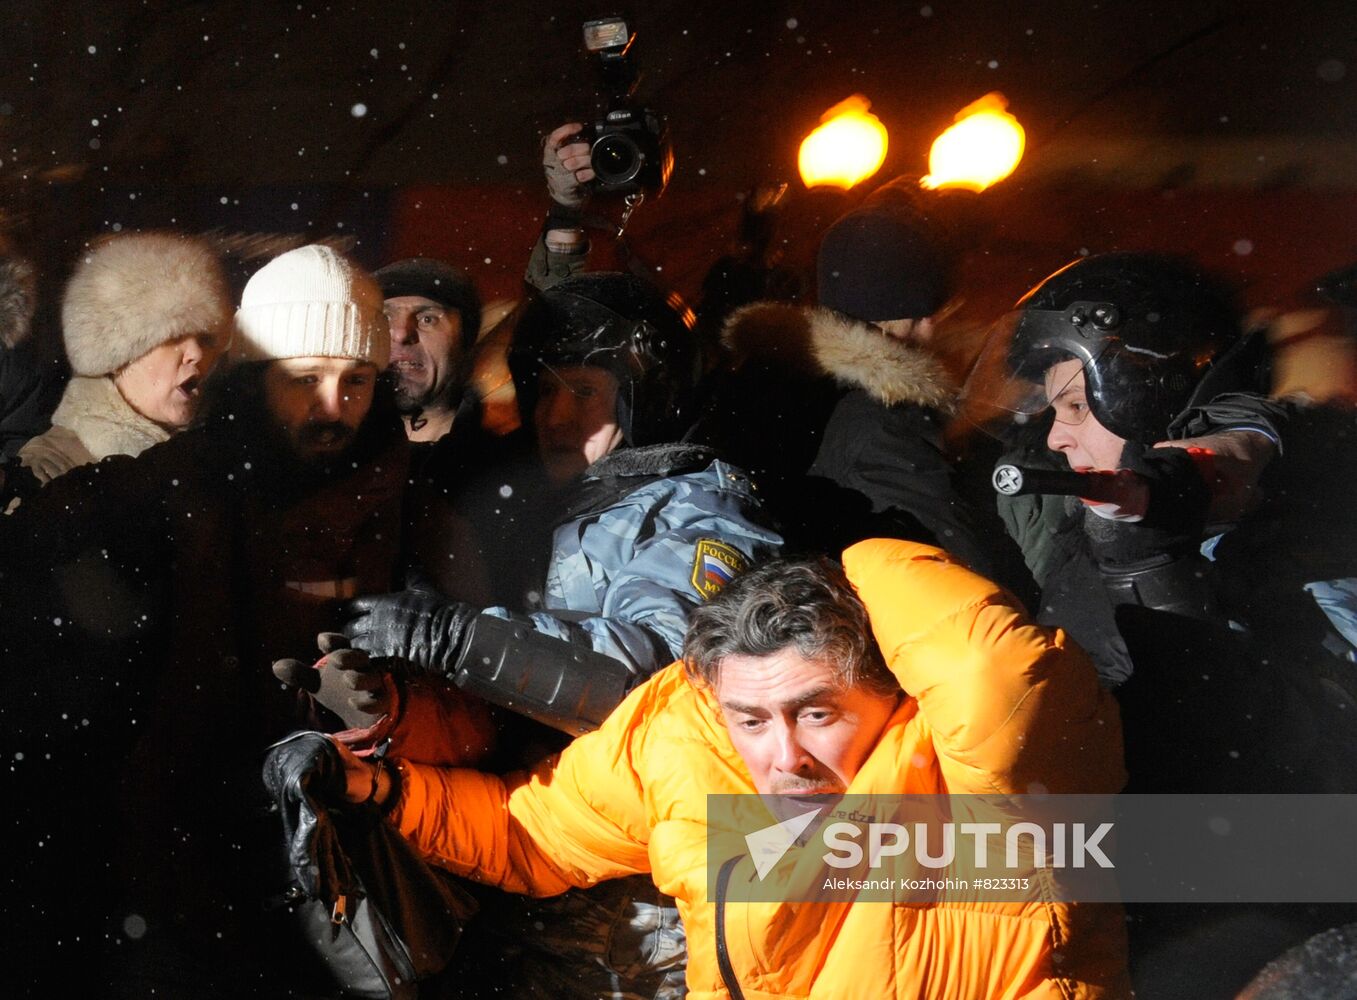 Participant of rally on Pushkinskaya Square being detained